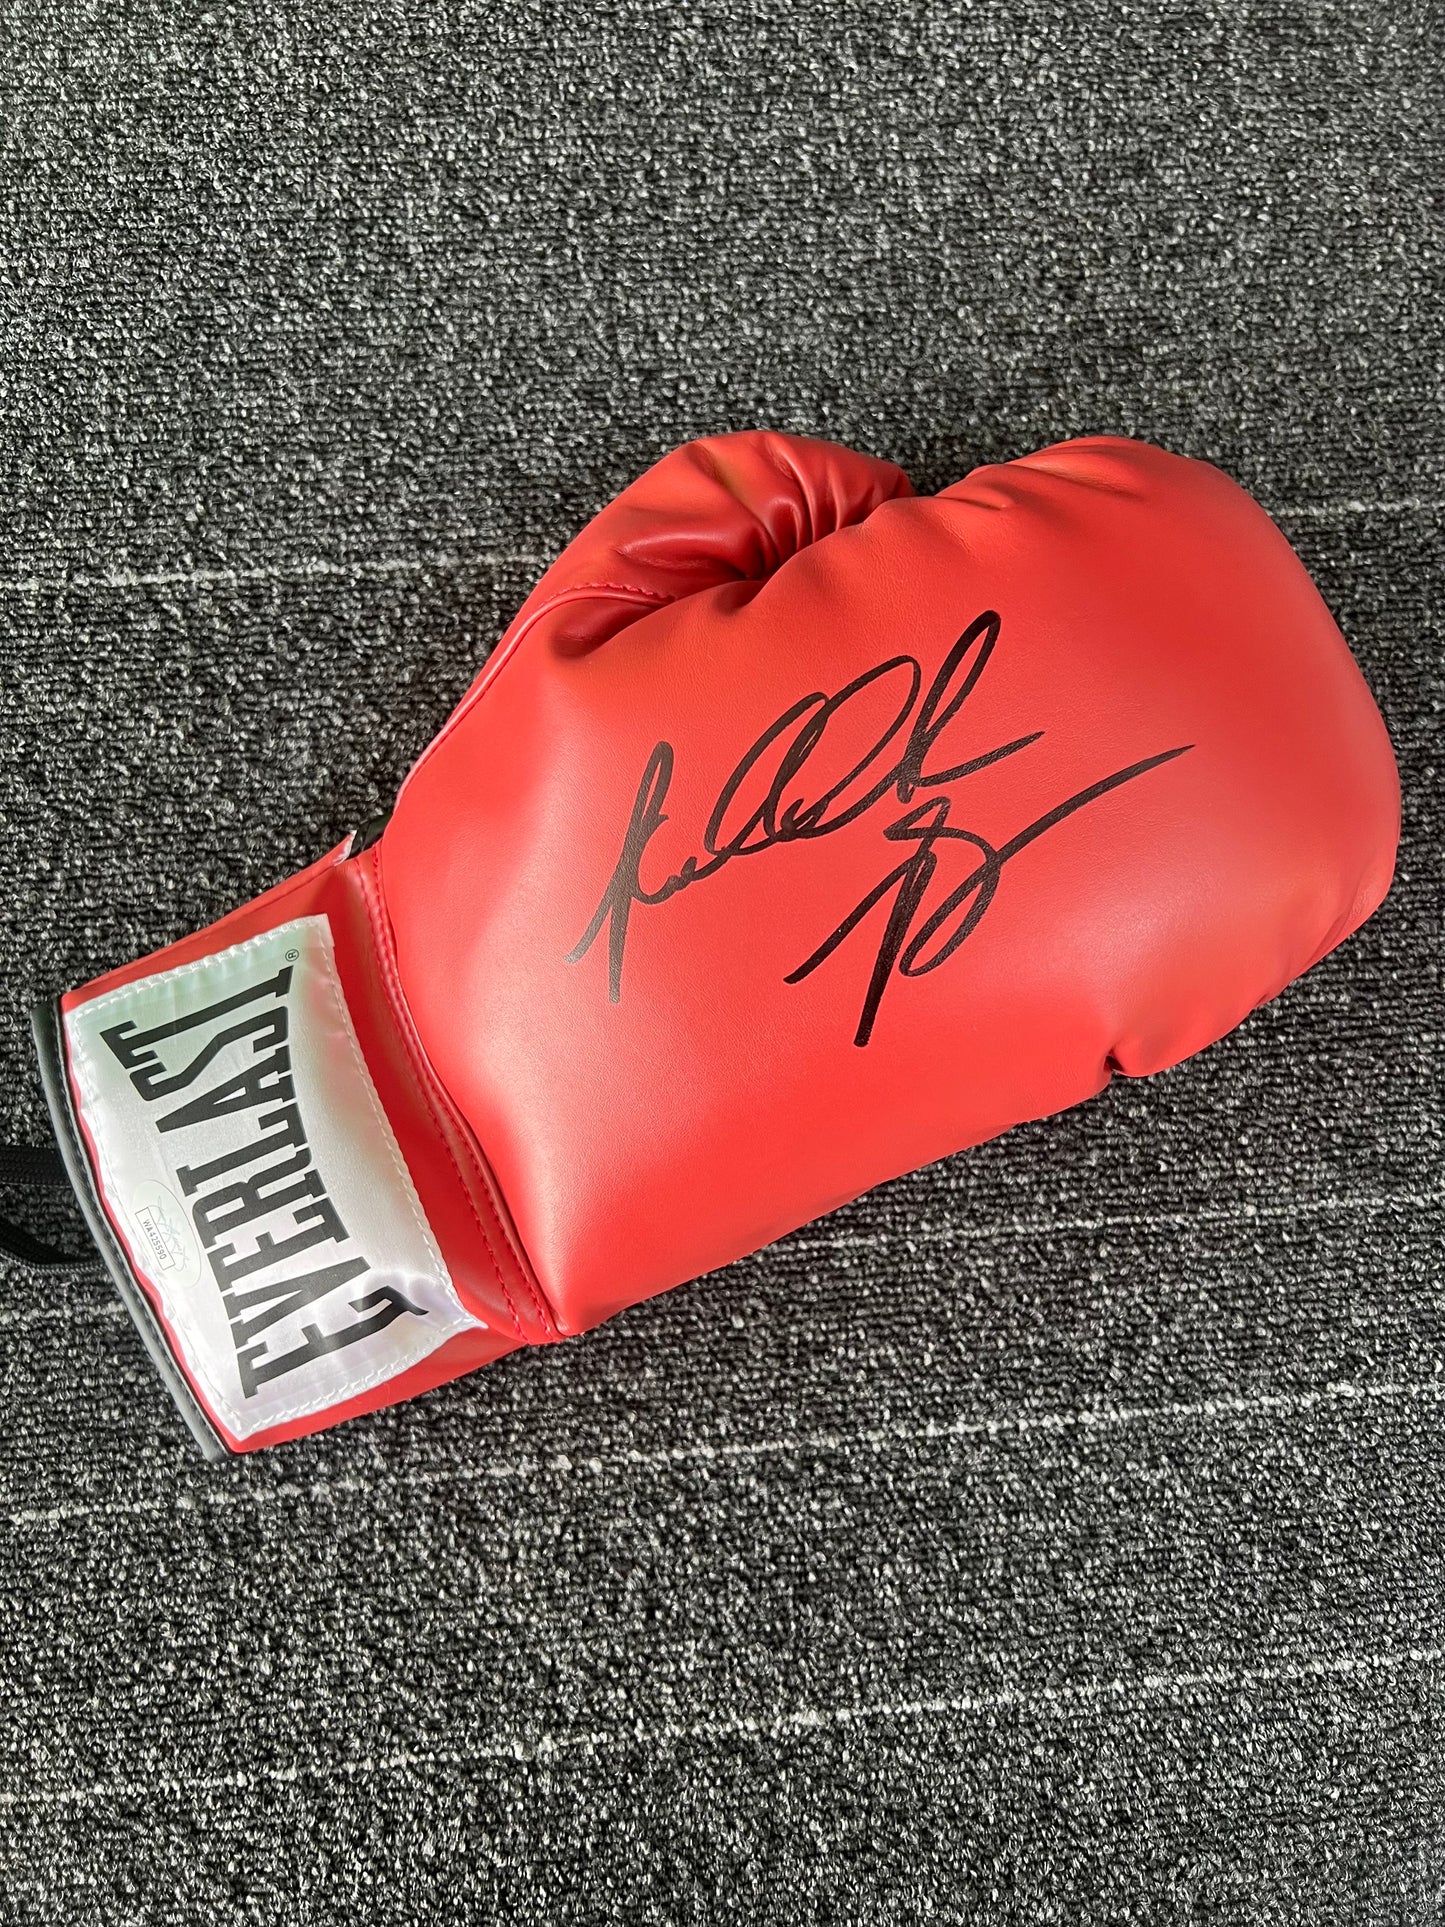 Riddick Bowe Signed Red Everlast Boxing Glove (right) with JSA COA